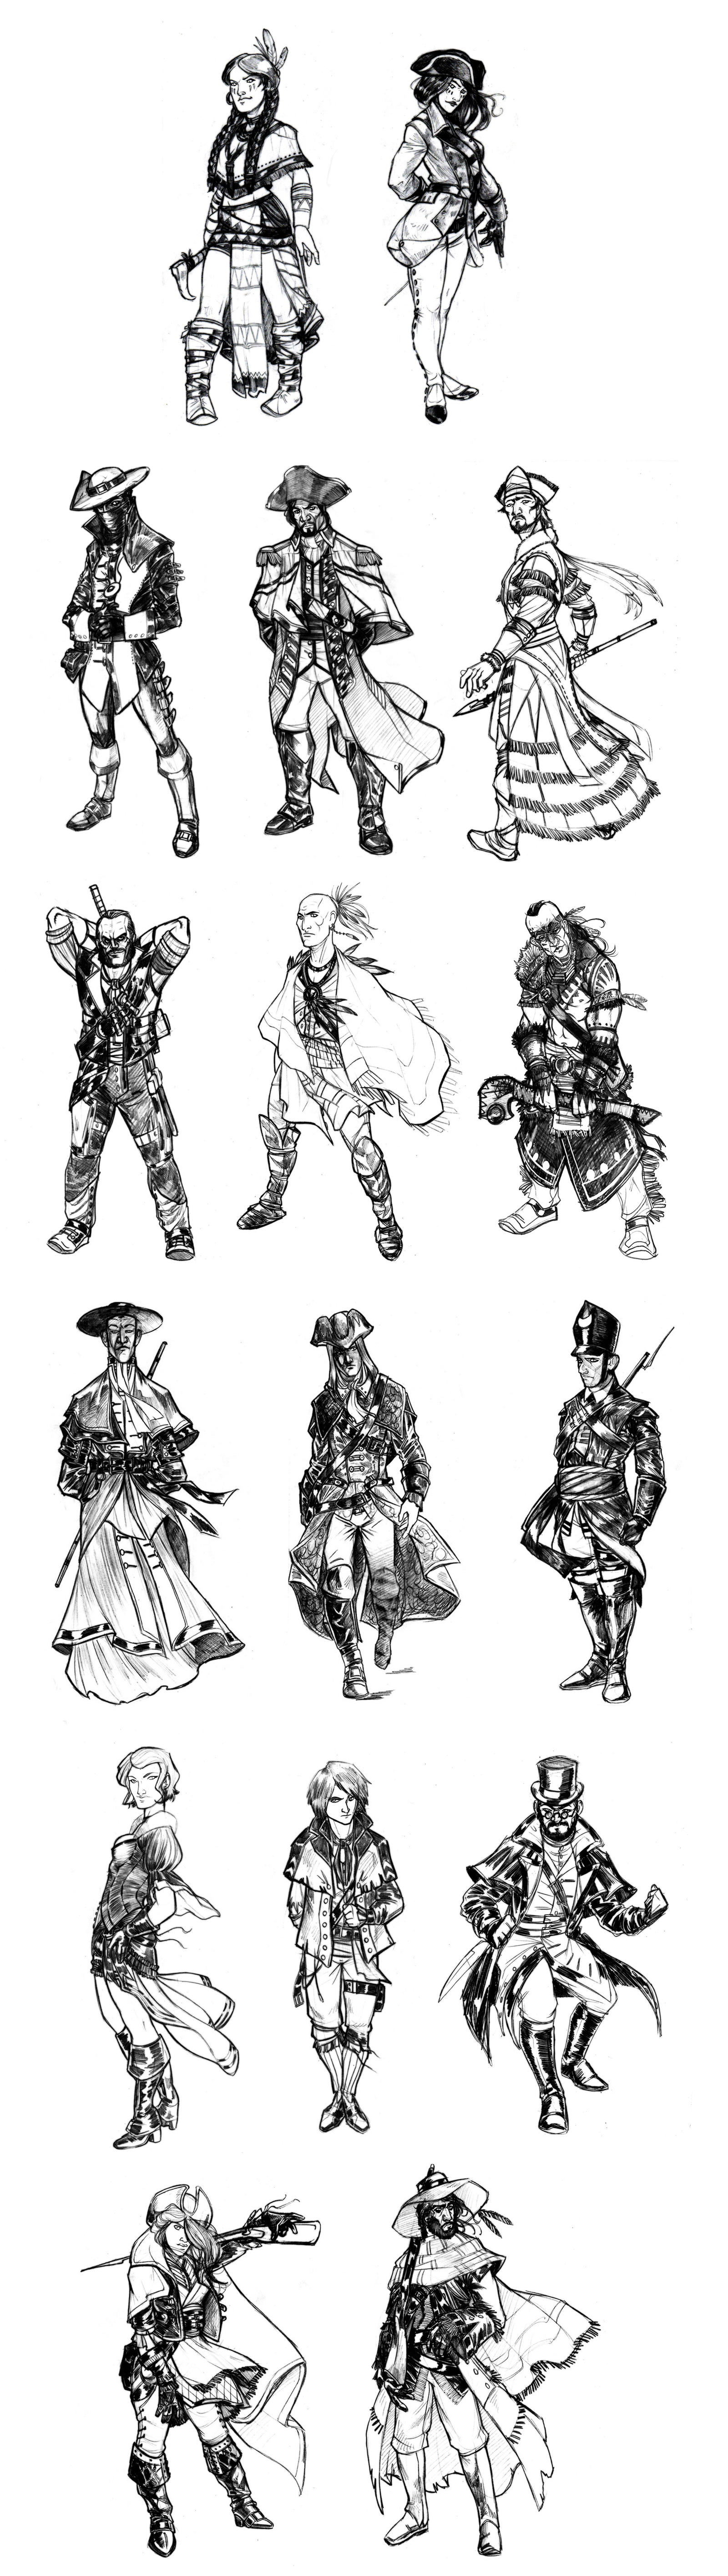 Assassin's Creed III - Multiplayer Characters / Characters - TV Tropes